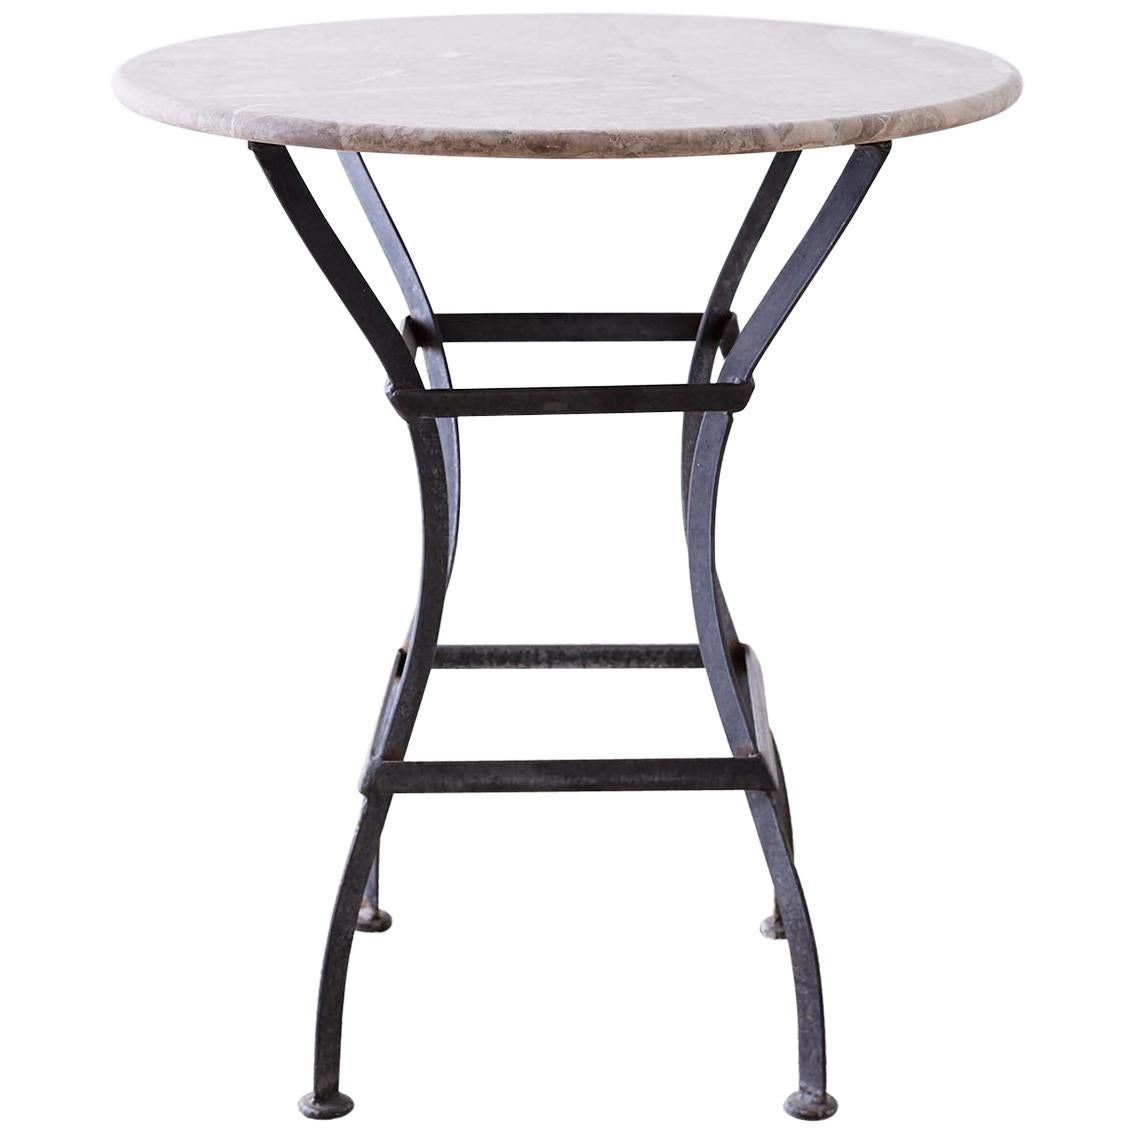 French Iron Stone Top Bistro or Cafe Table